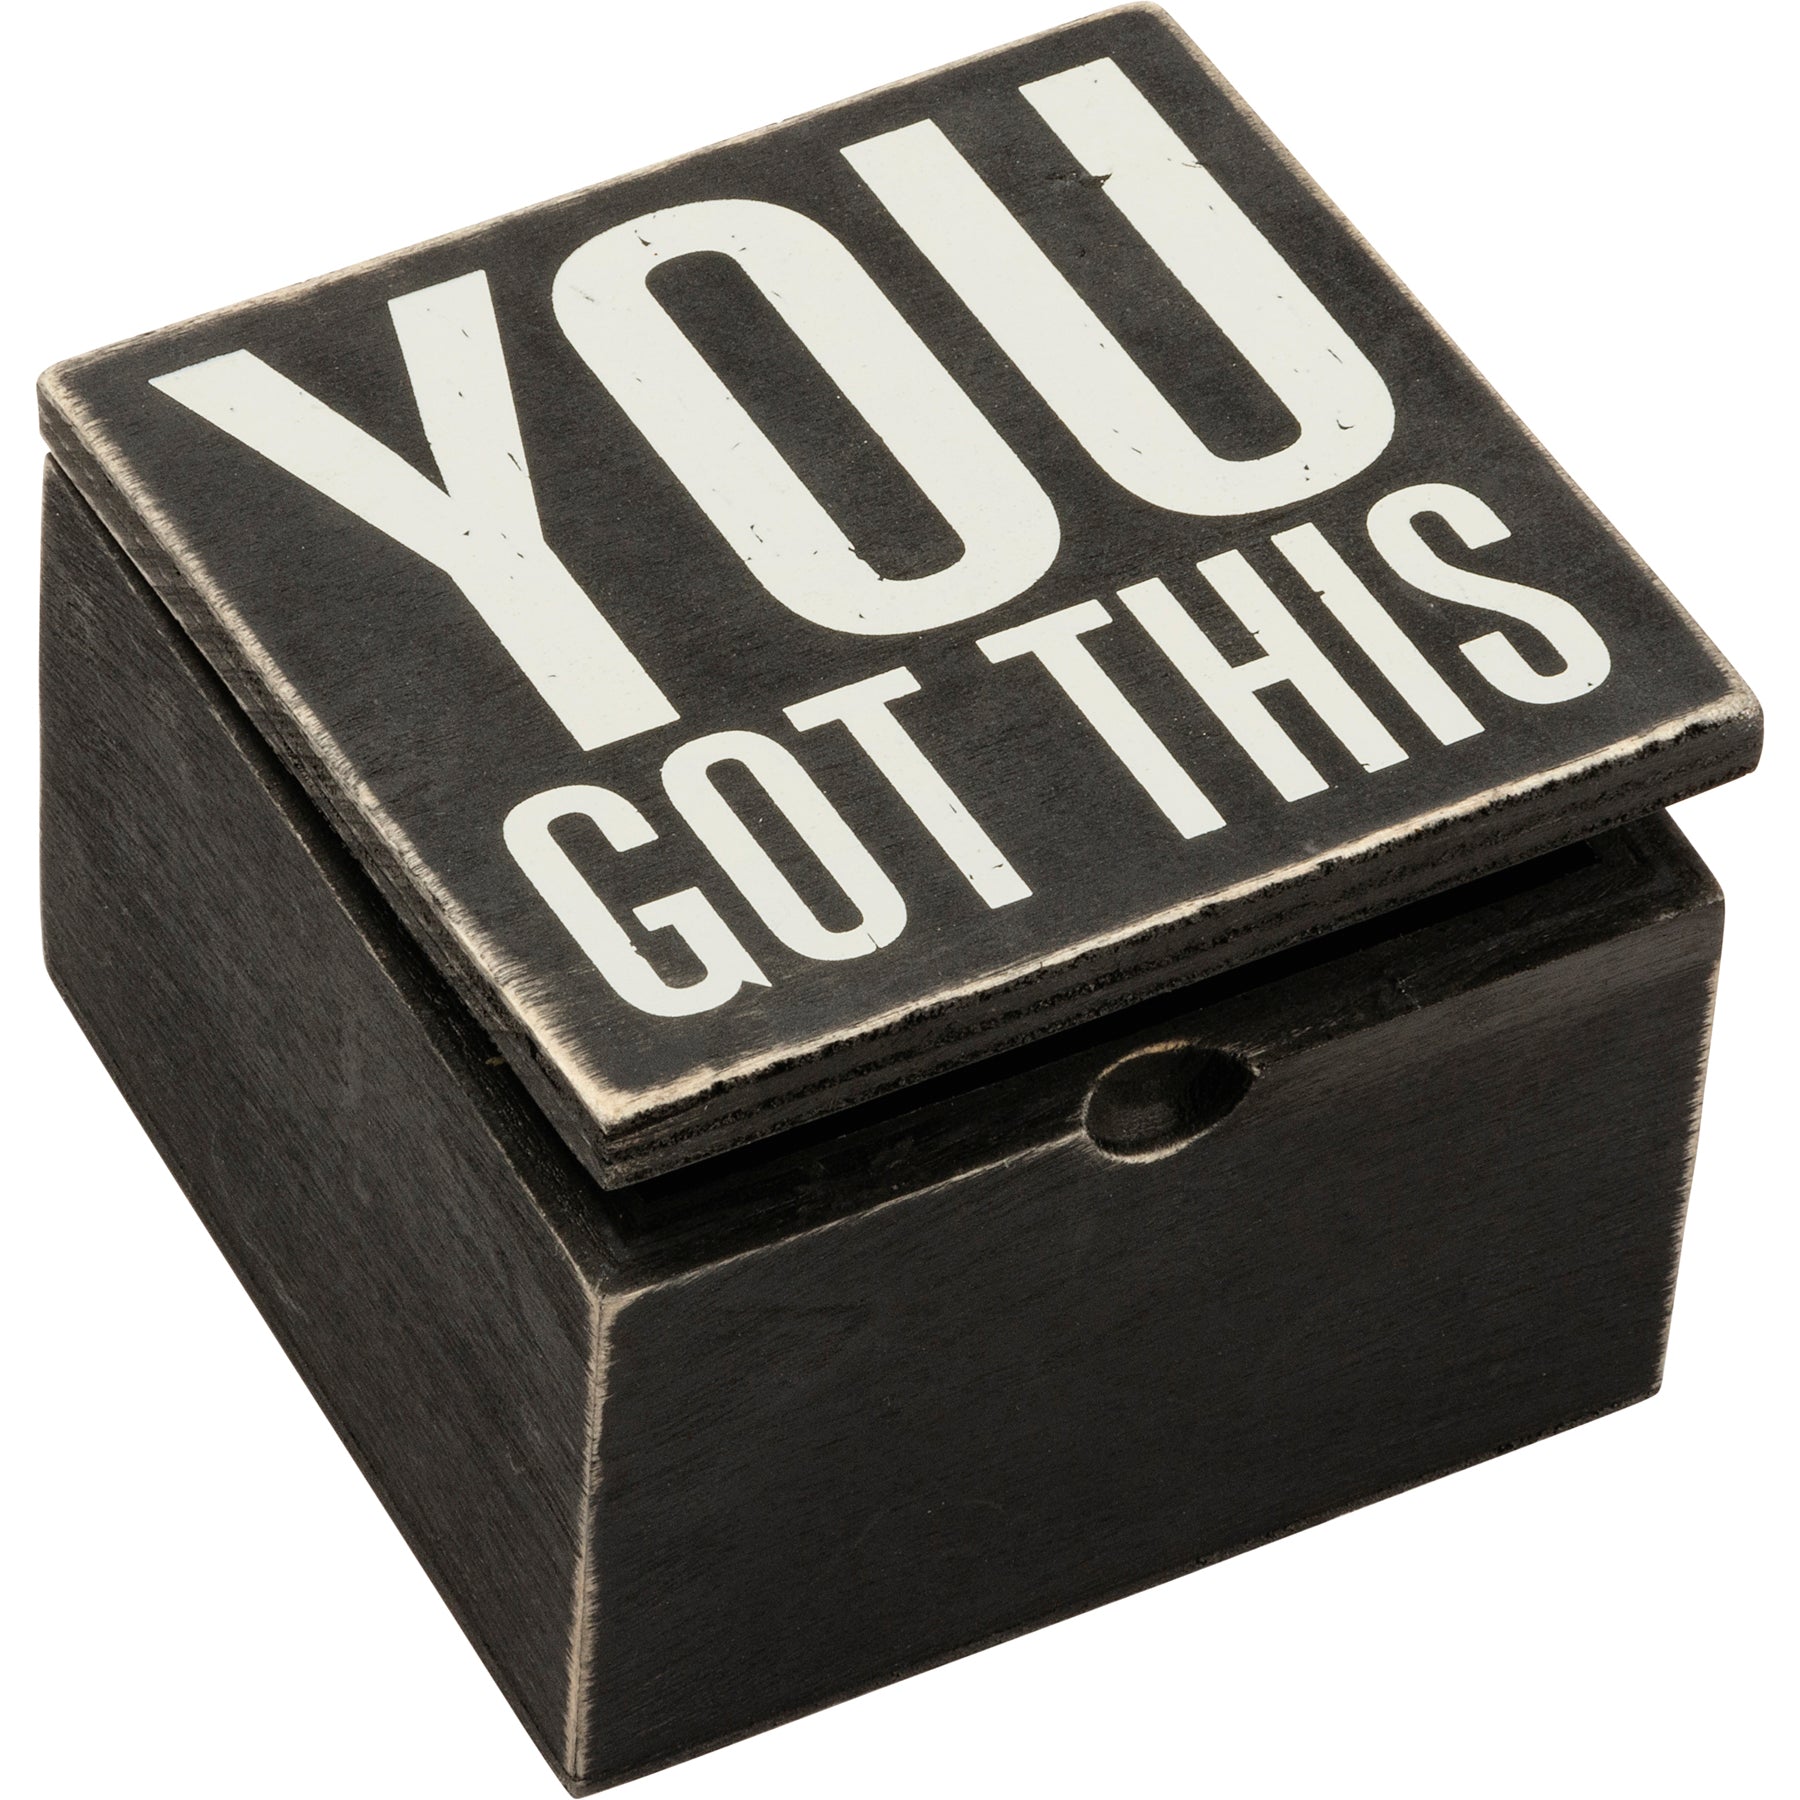 You Got This Wooden Hinged Box